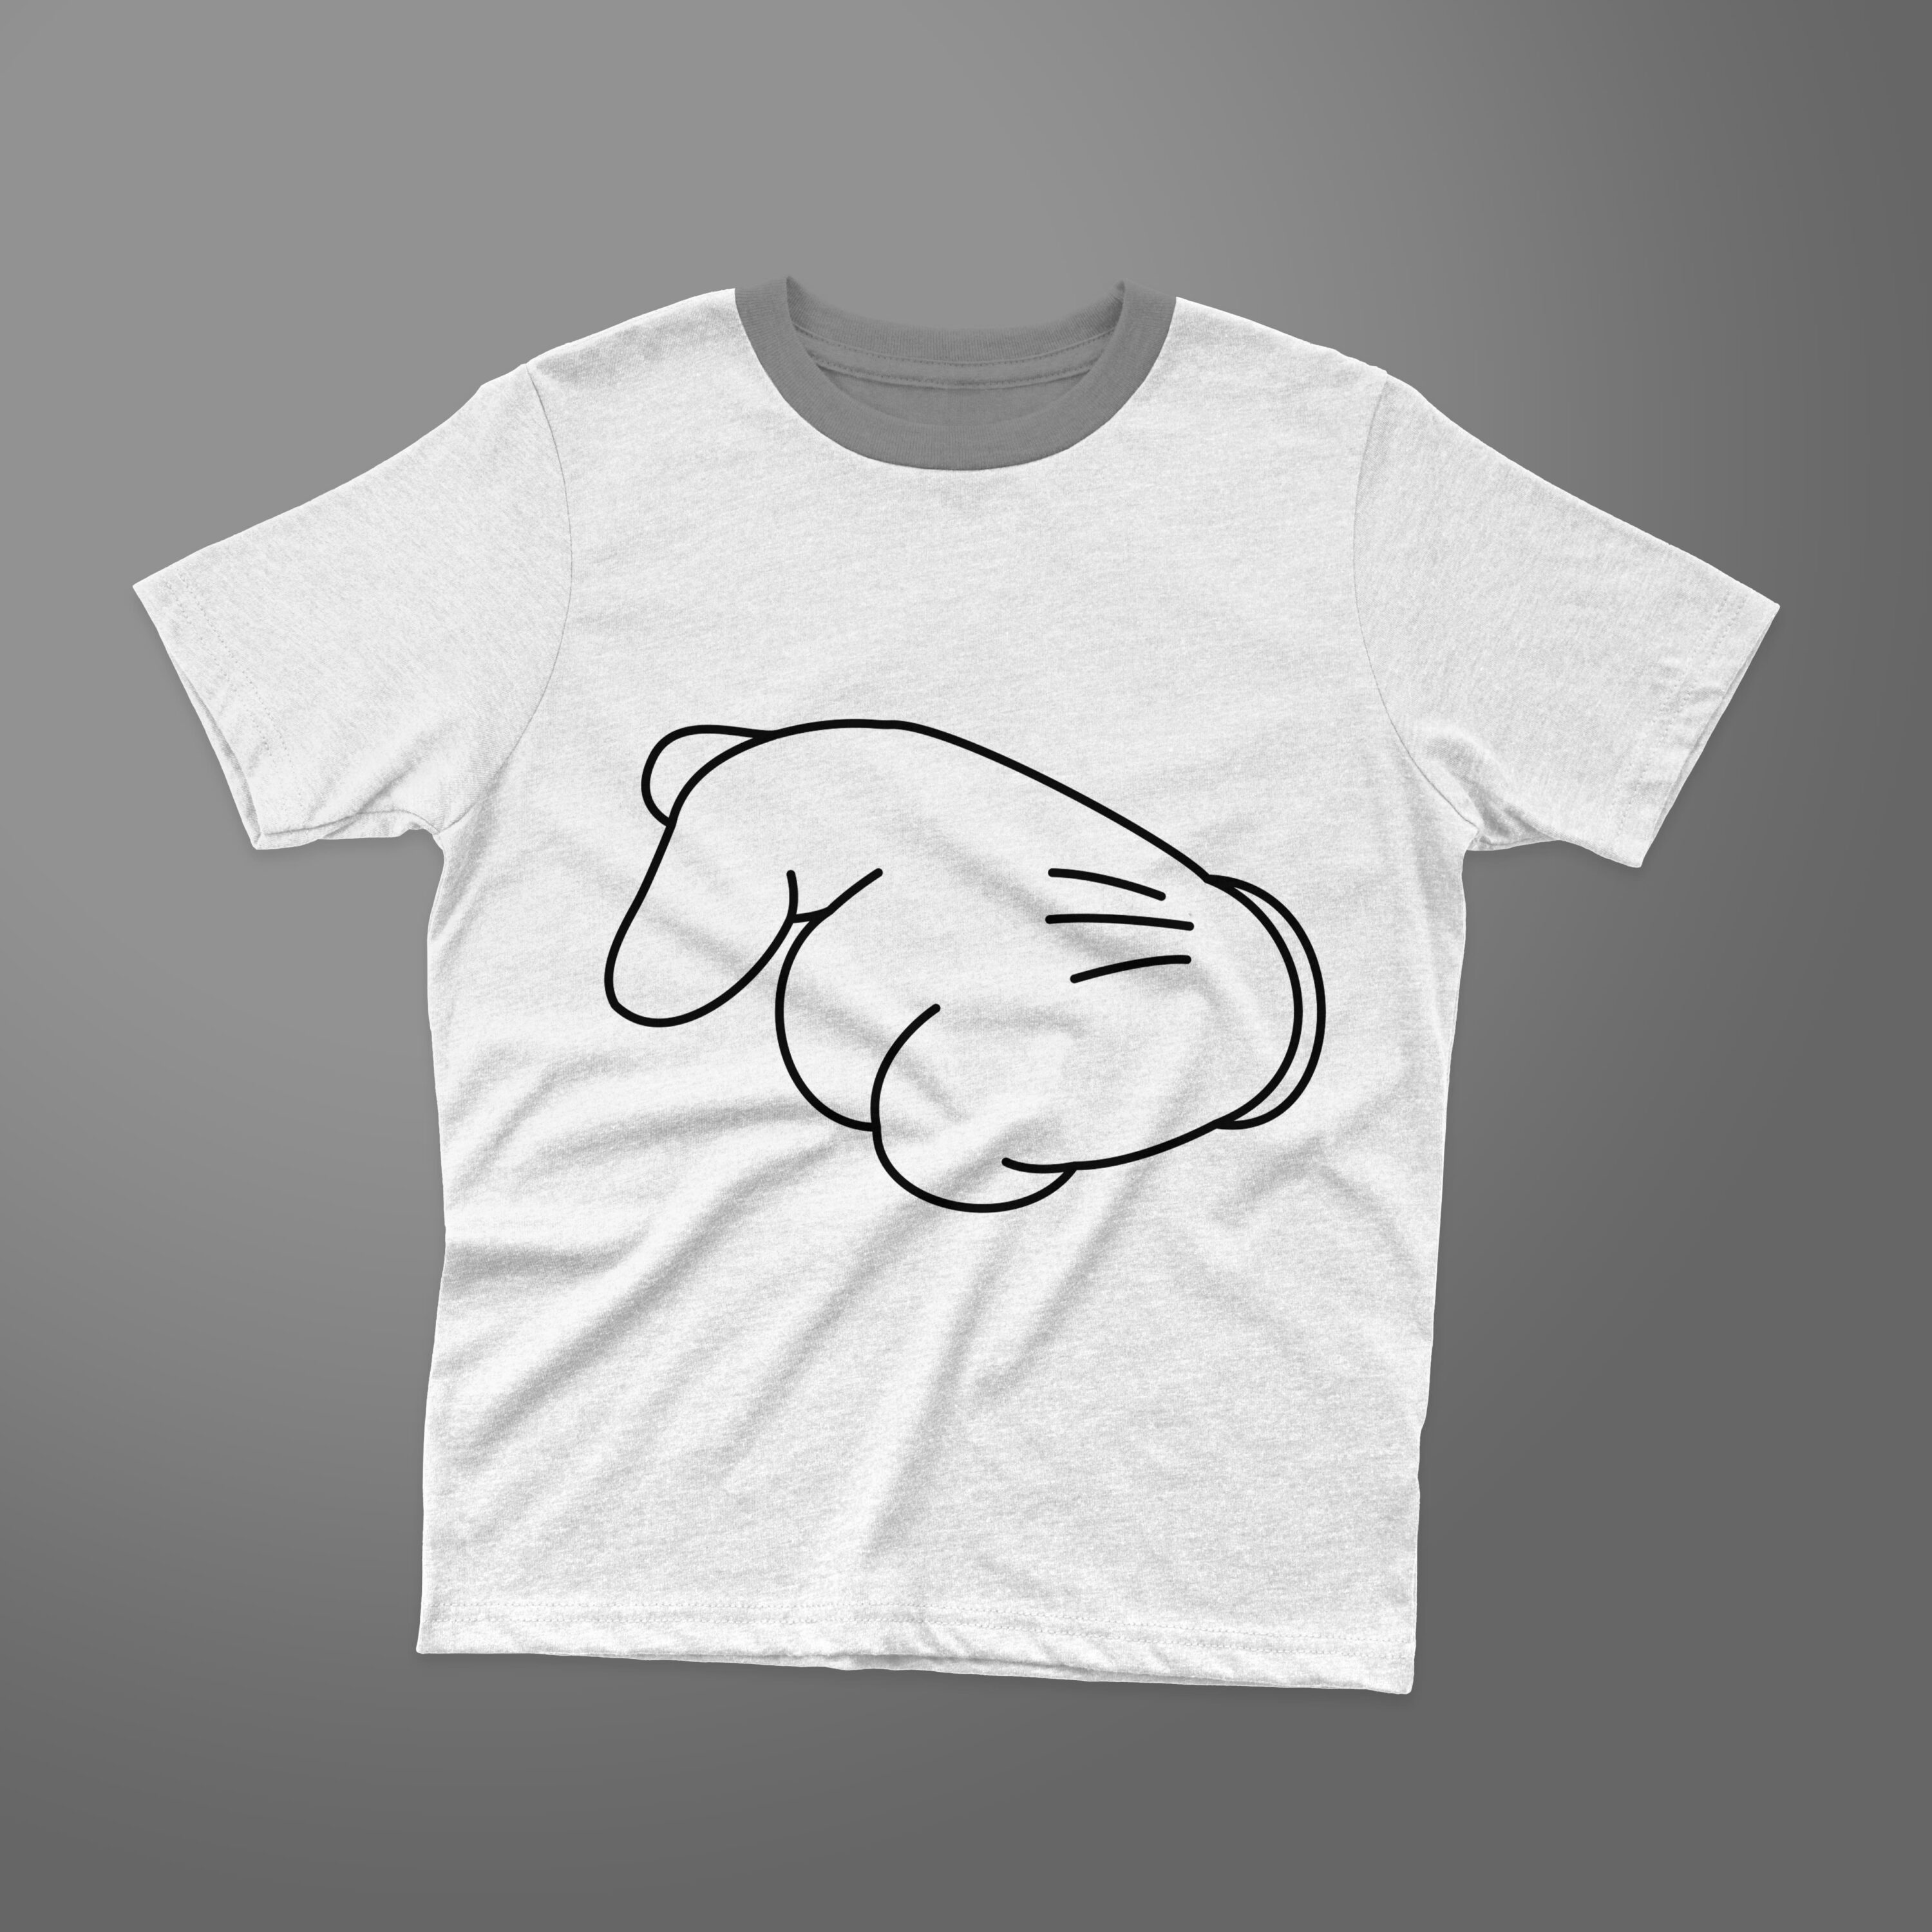 Outline mickey mouse hand on a classic white t-shirt.